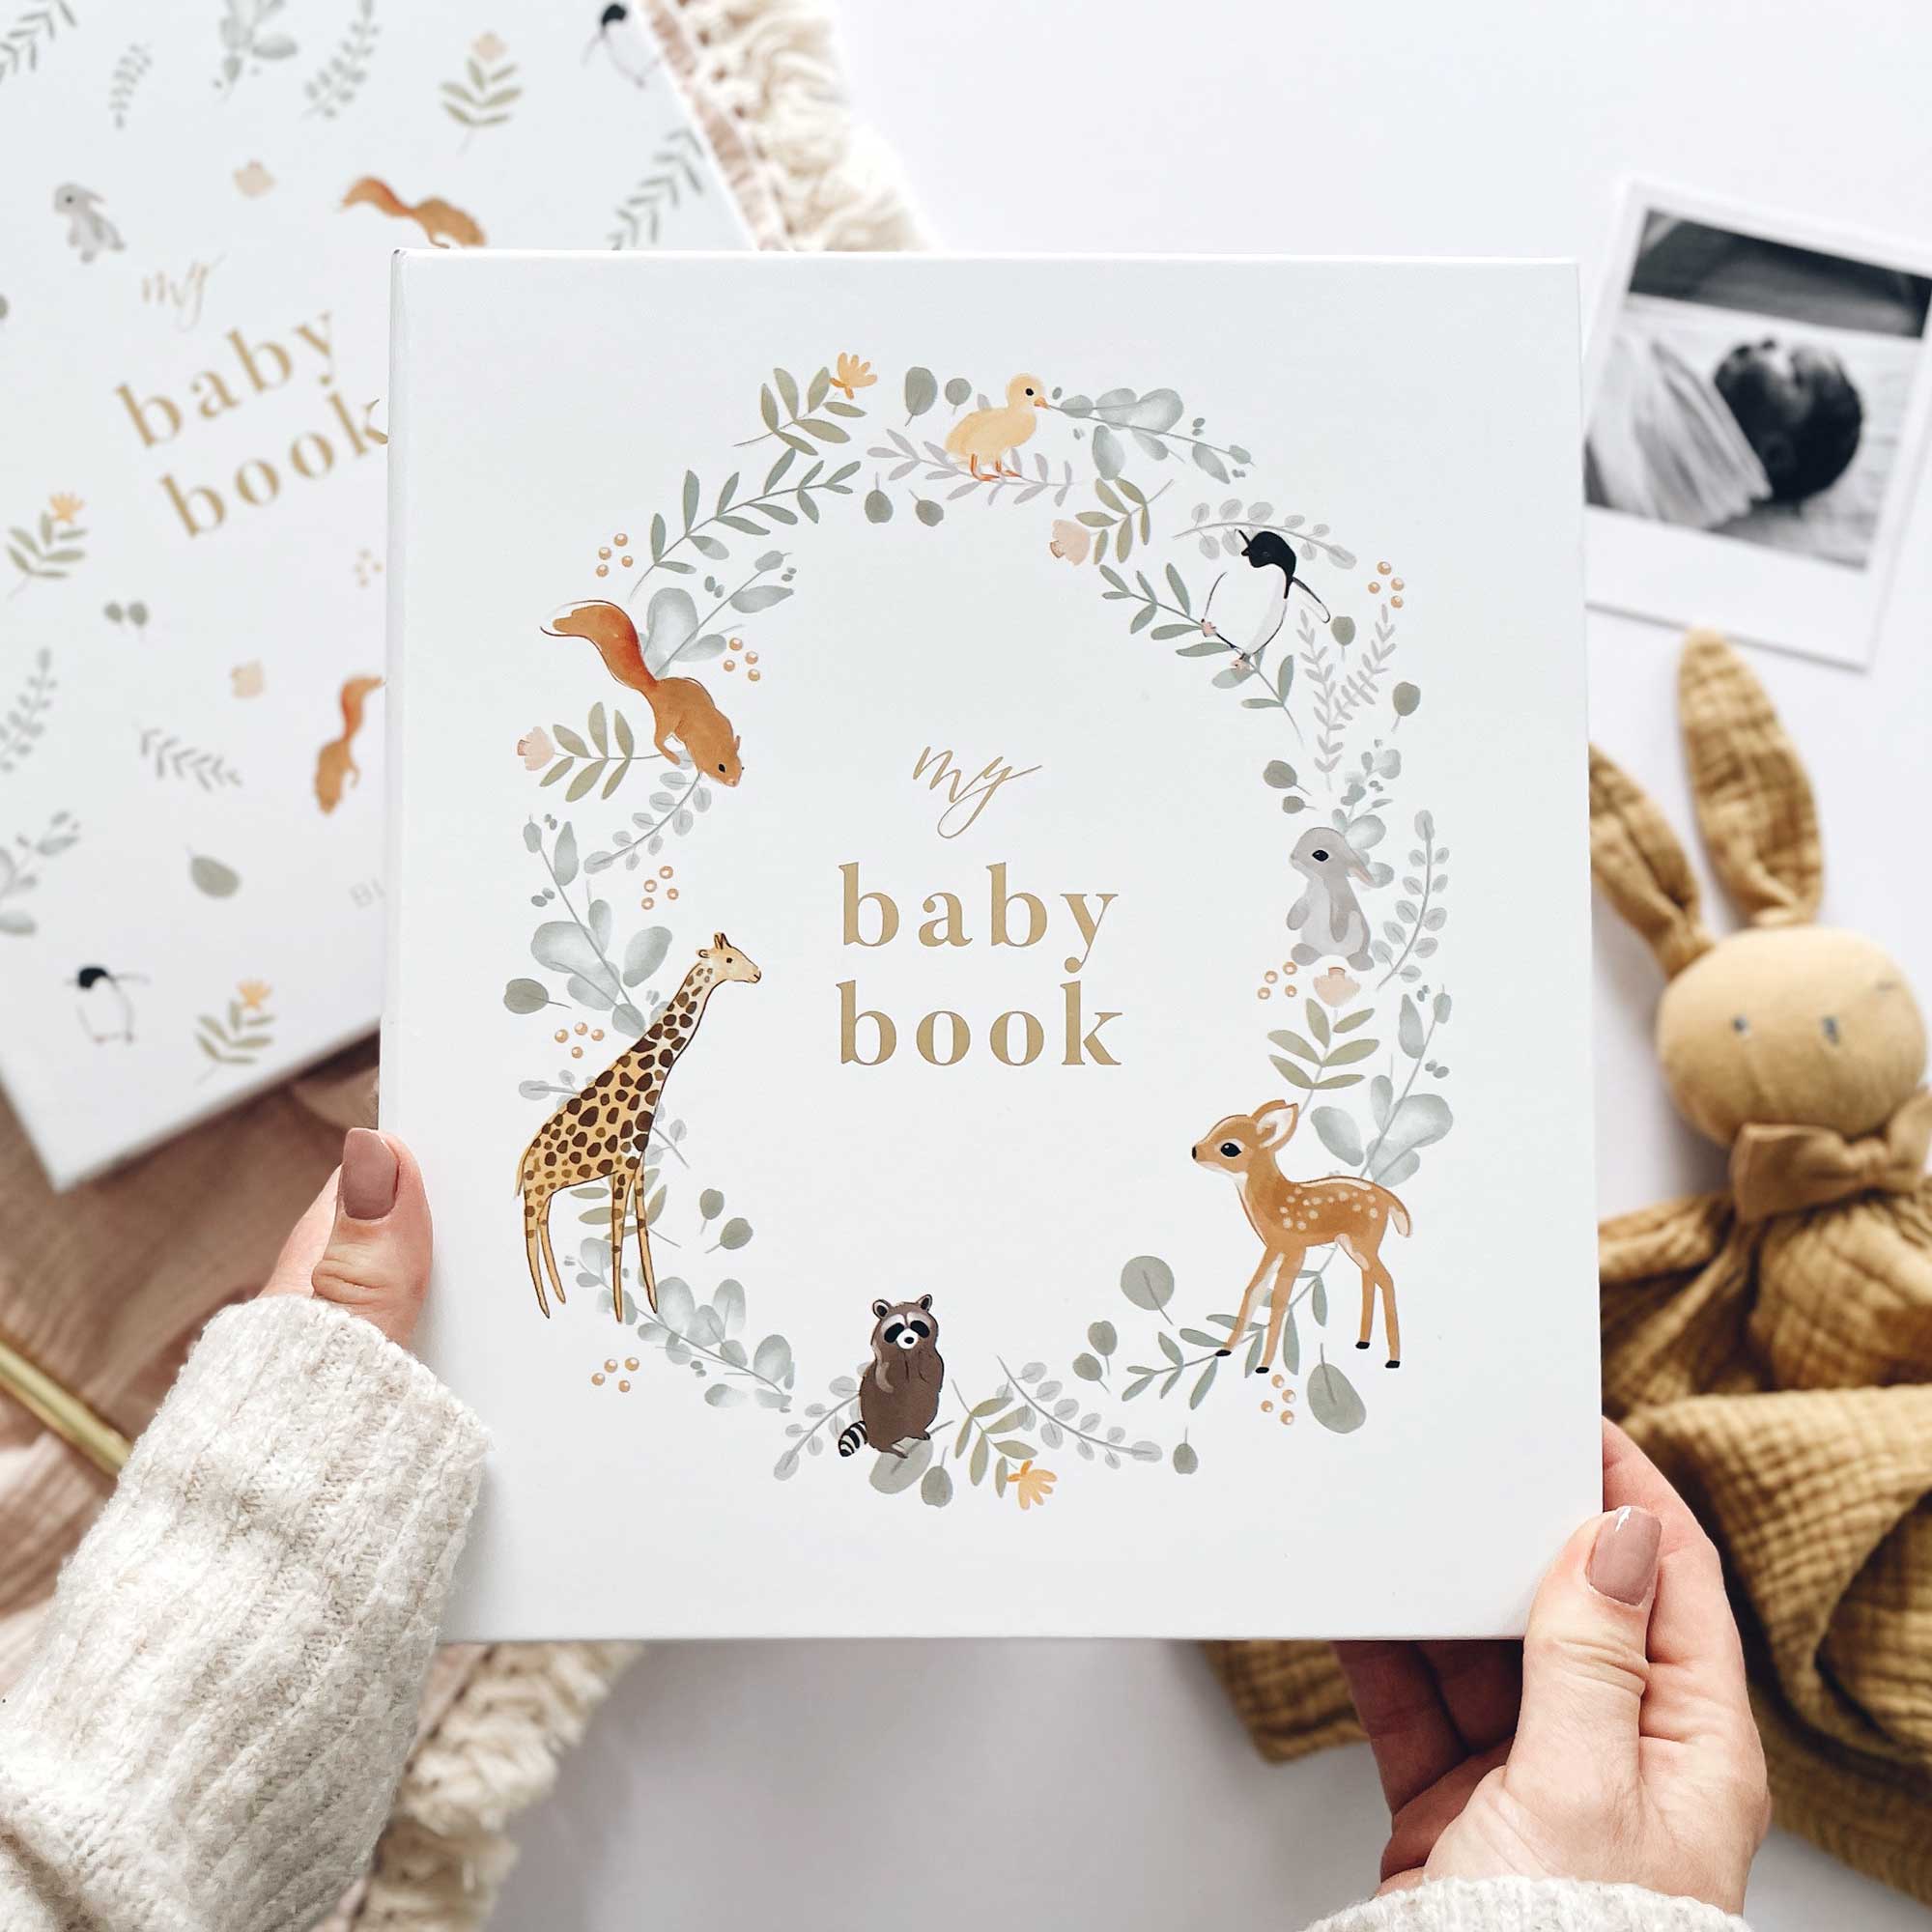 Blush and Gold My Baby Book - Baby Memory Book - Animals